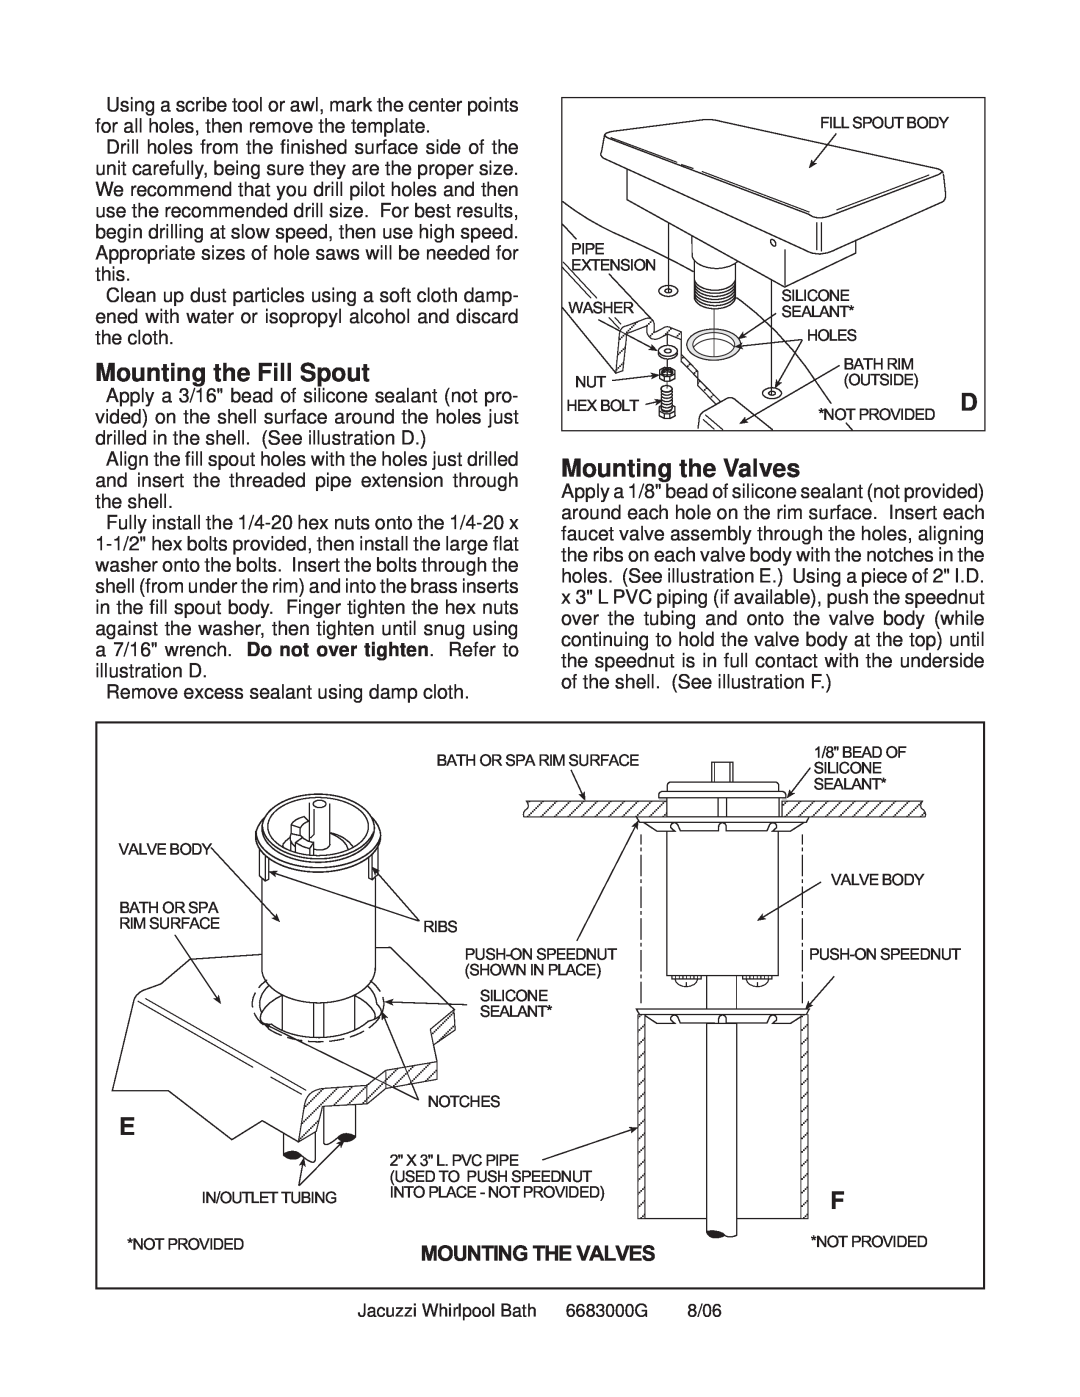 Jacuzzi Faucet Kit installation instructions Mounting the Fill Spout, Mounting the Valves, Mounting The Valves 